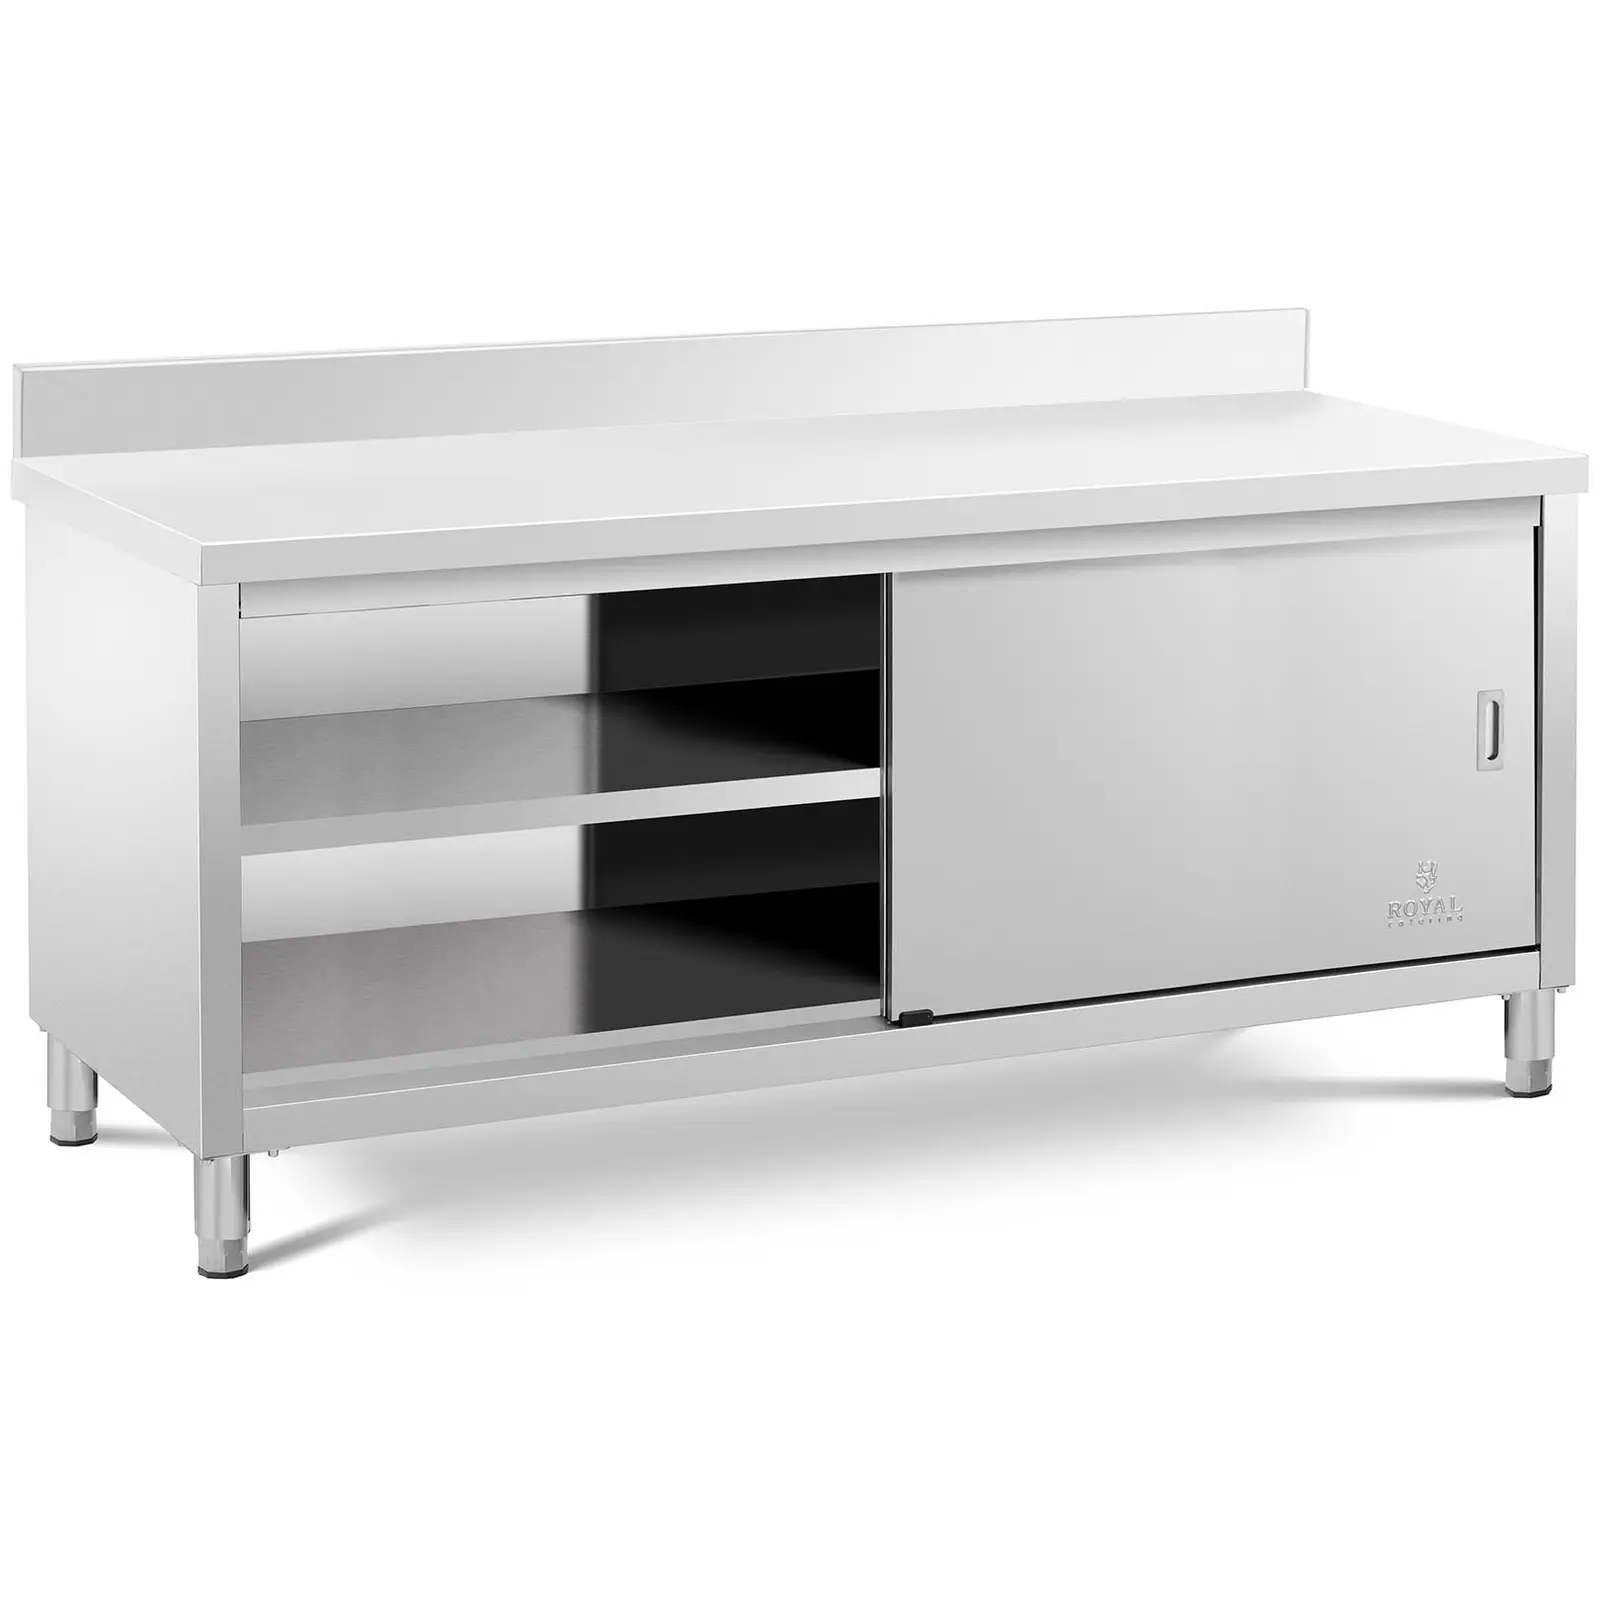 Work Cabinet - upstand - 200 x 70 cm - 600 kg load capacity